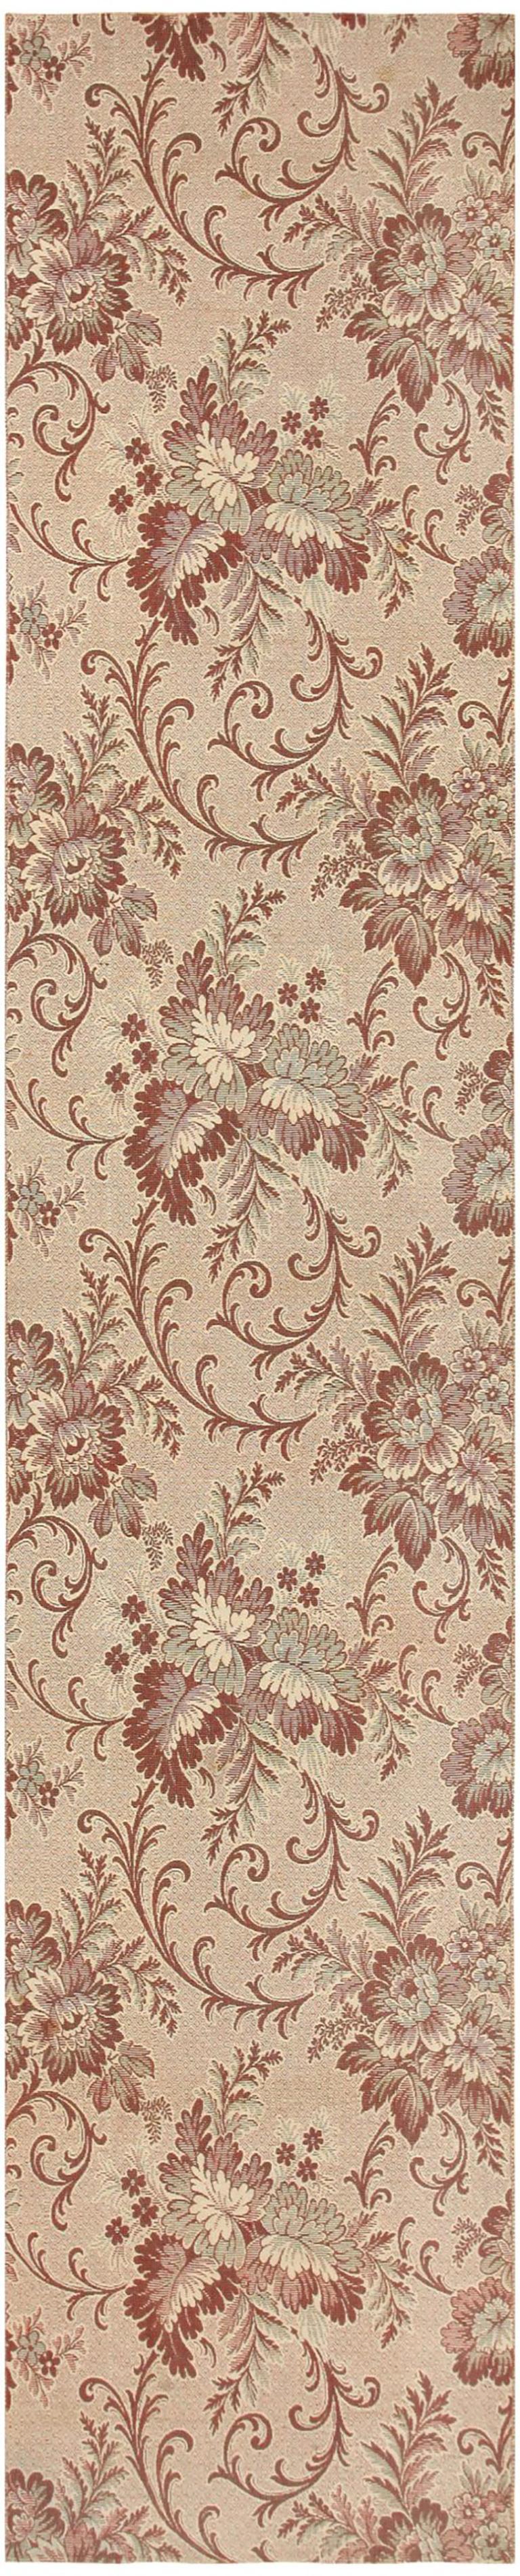 Neutral Flat Woven Antique American Ingrain Rug, Country of Origin: United States, Circa Date: 1920